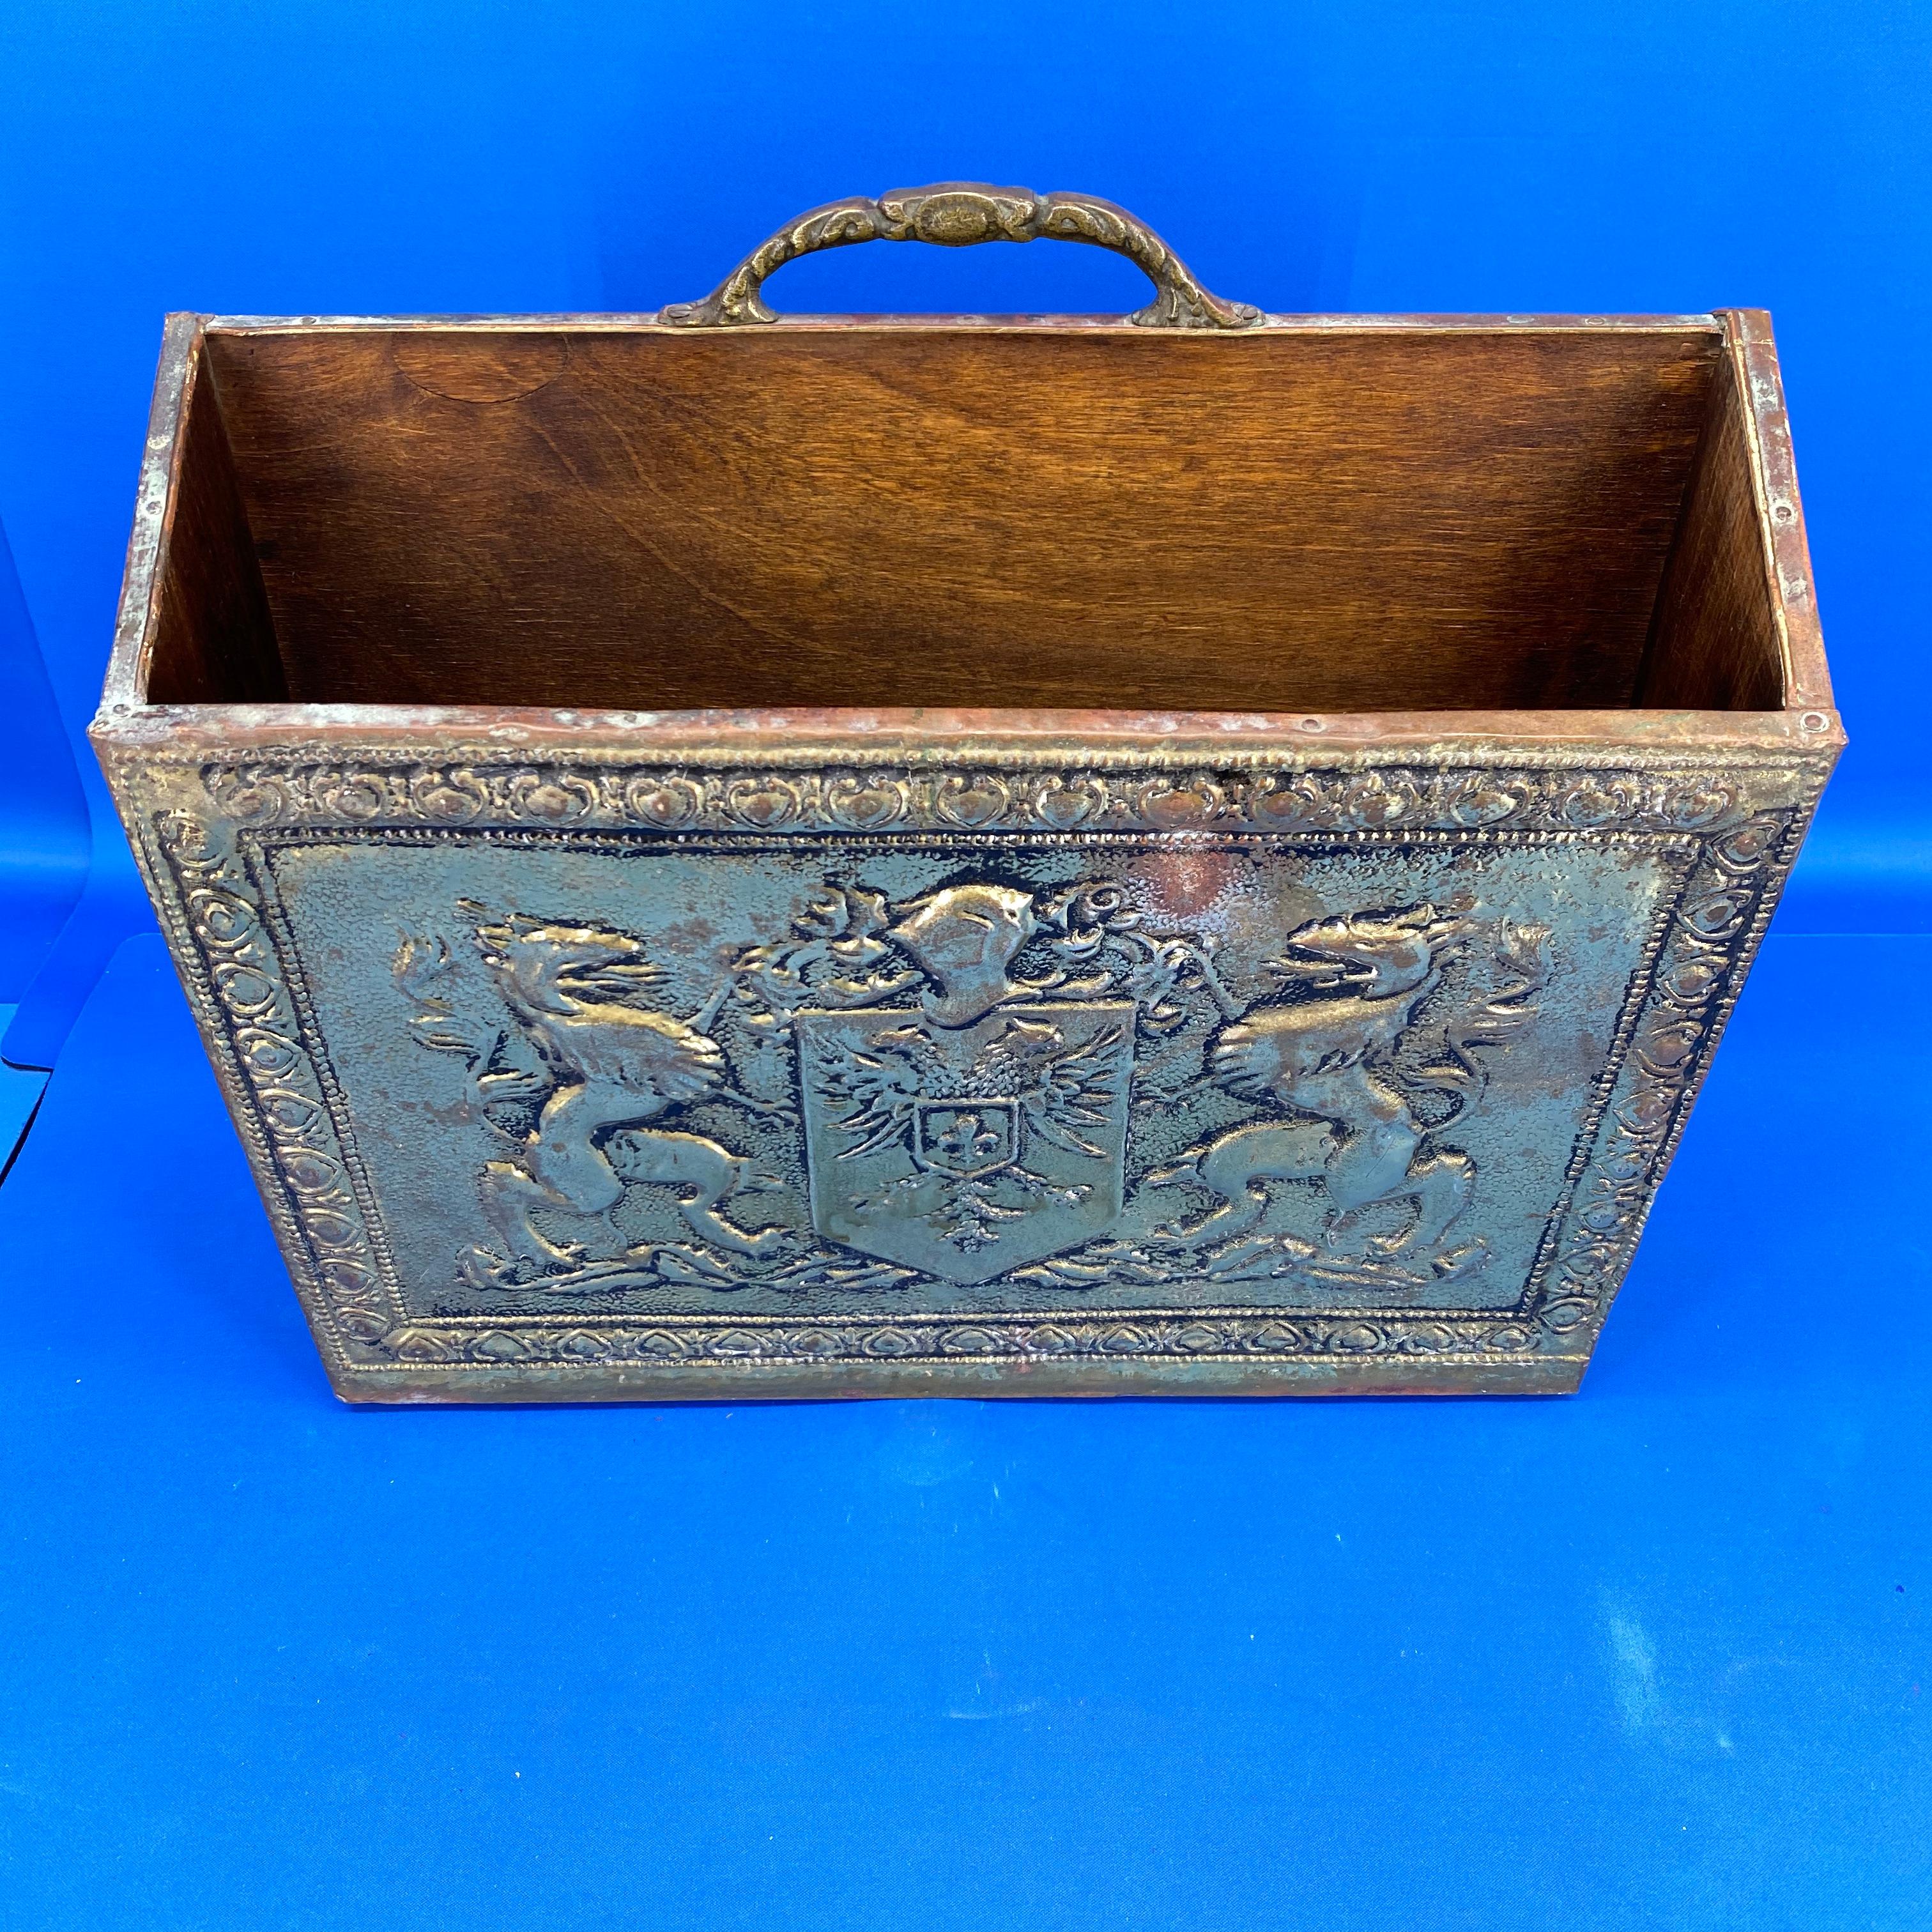 Early 20th Century Early Victorian Style Brass Magazine Rack With Code Of Arms, Griffins And Eagles